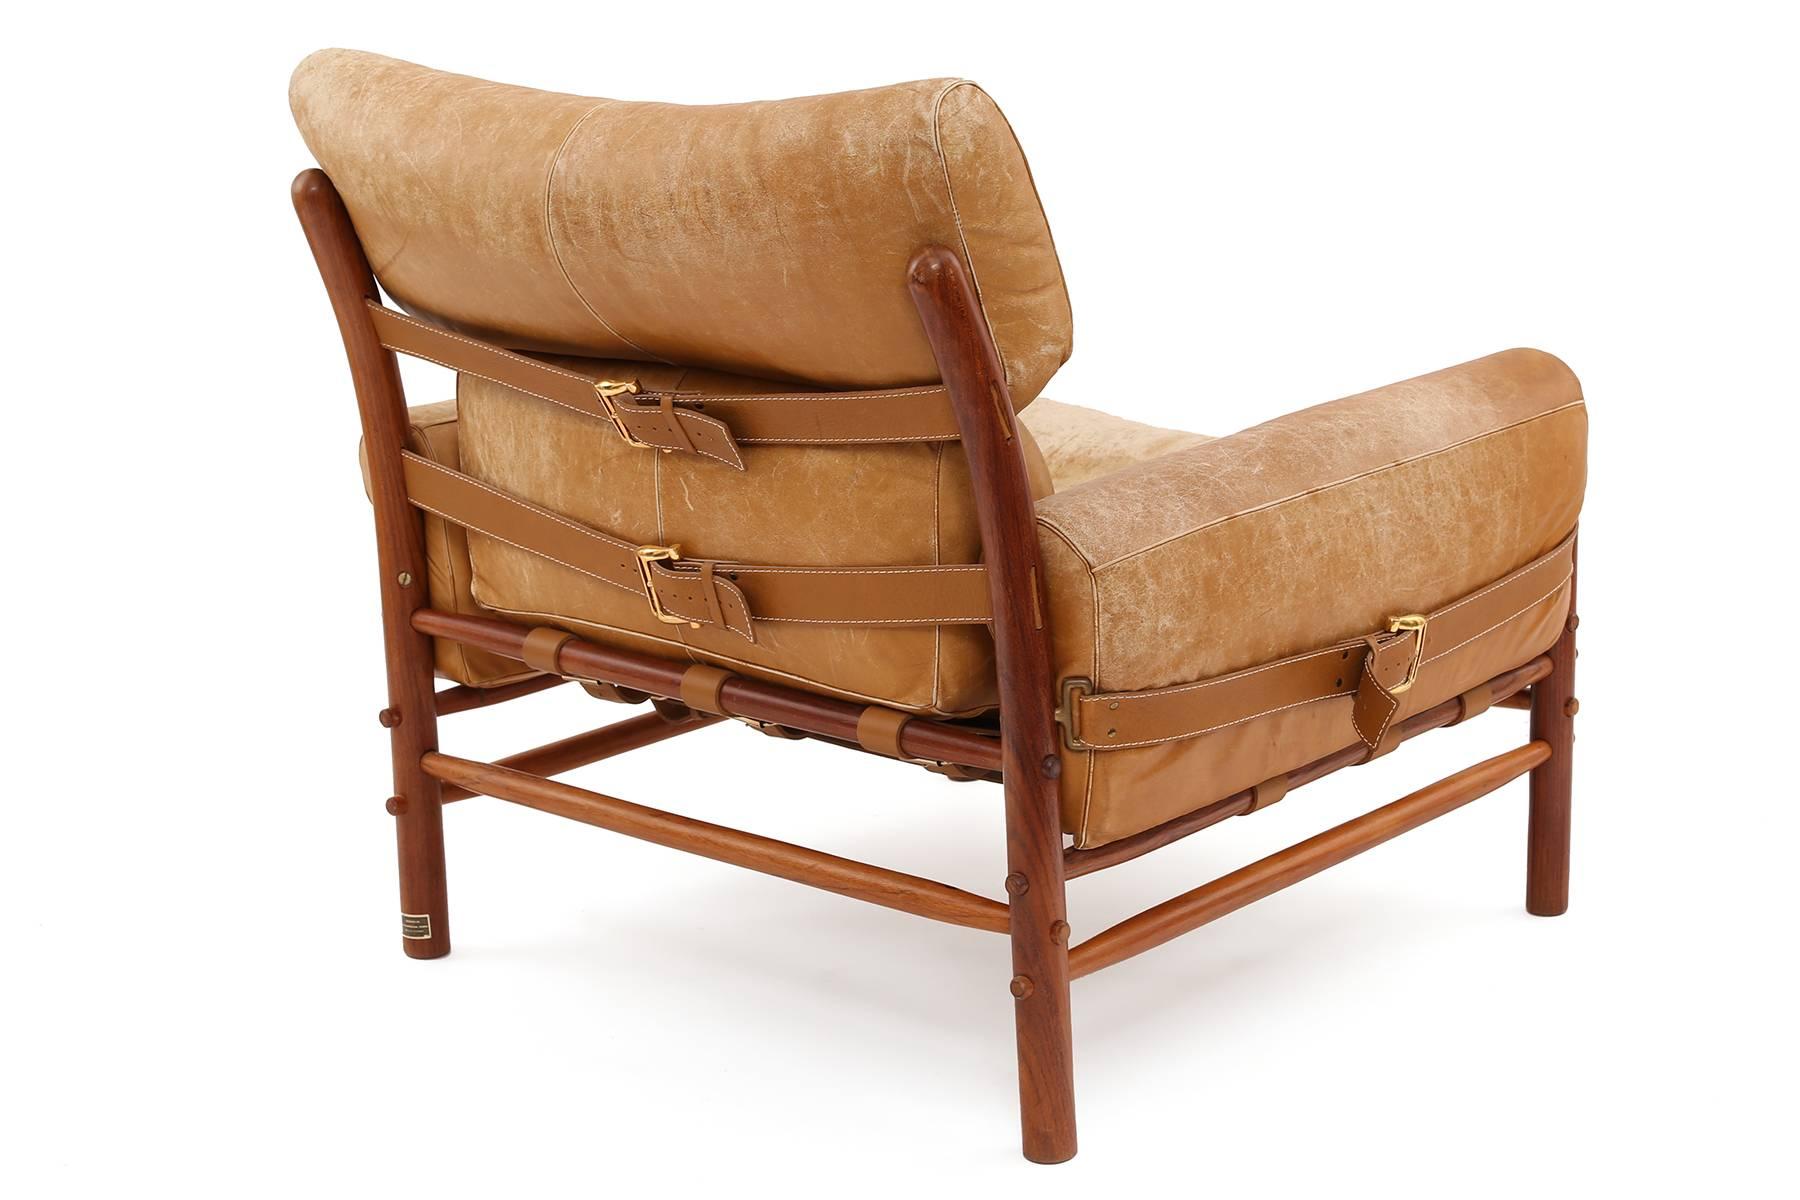 Beech leather and brass lounge chair by Arne Norell, circa mid-1960s. This all original example has perfectly patinated camel leather with brass buckle detailing and solid beechwood frame. Retains original designer label.

